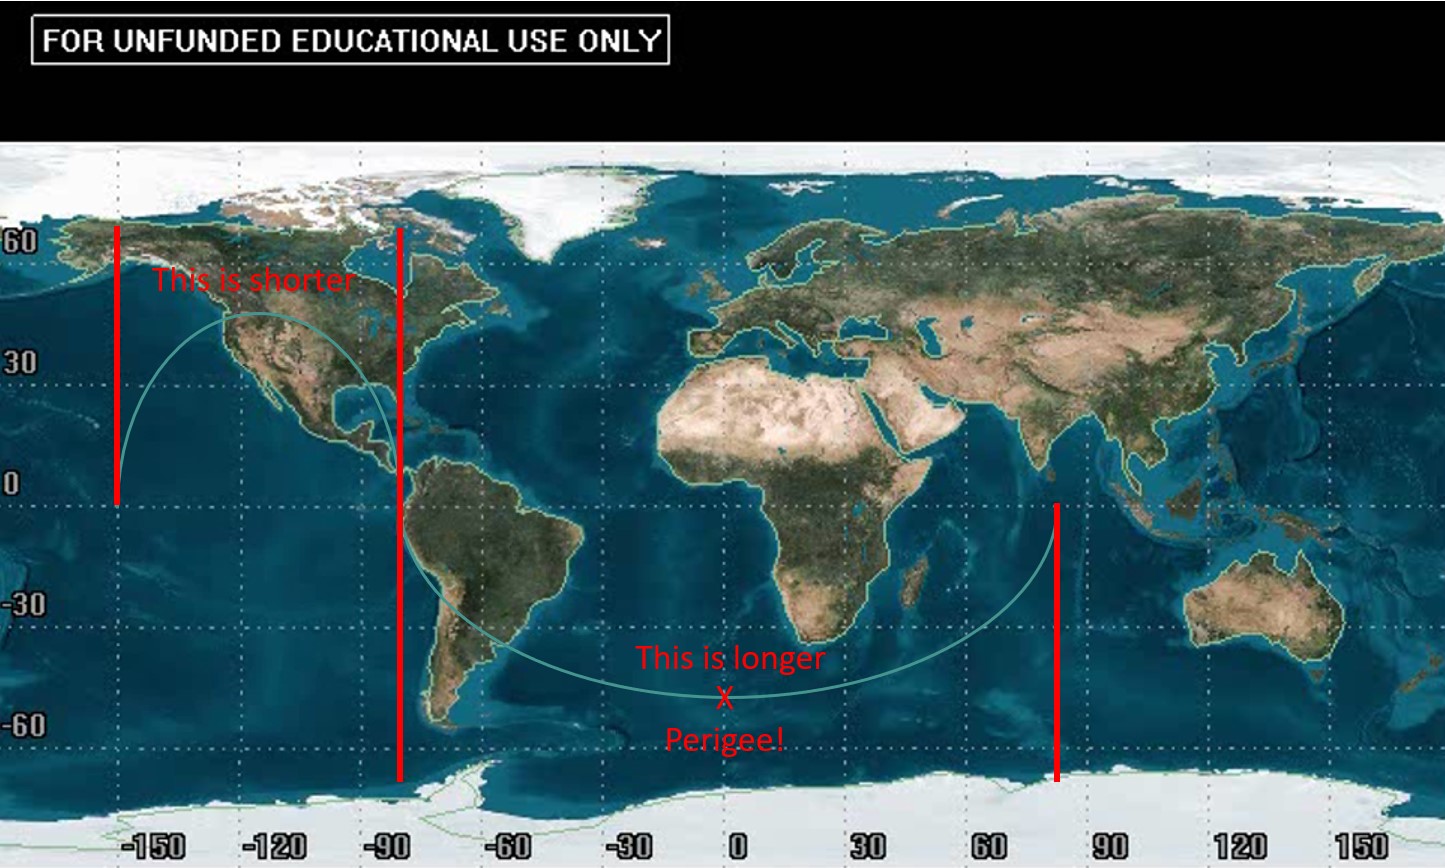 The image illustrates that perigee is approximately halfway through the "long" portion of the orbit, where the satellite is moving fastest. It emphasizes the common error of reading the angle of longitude where perigee occurs and calling it the argument of perigee, noting that the correct definition involves the angle between the ascending node and perigee.